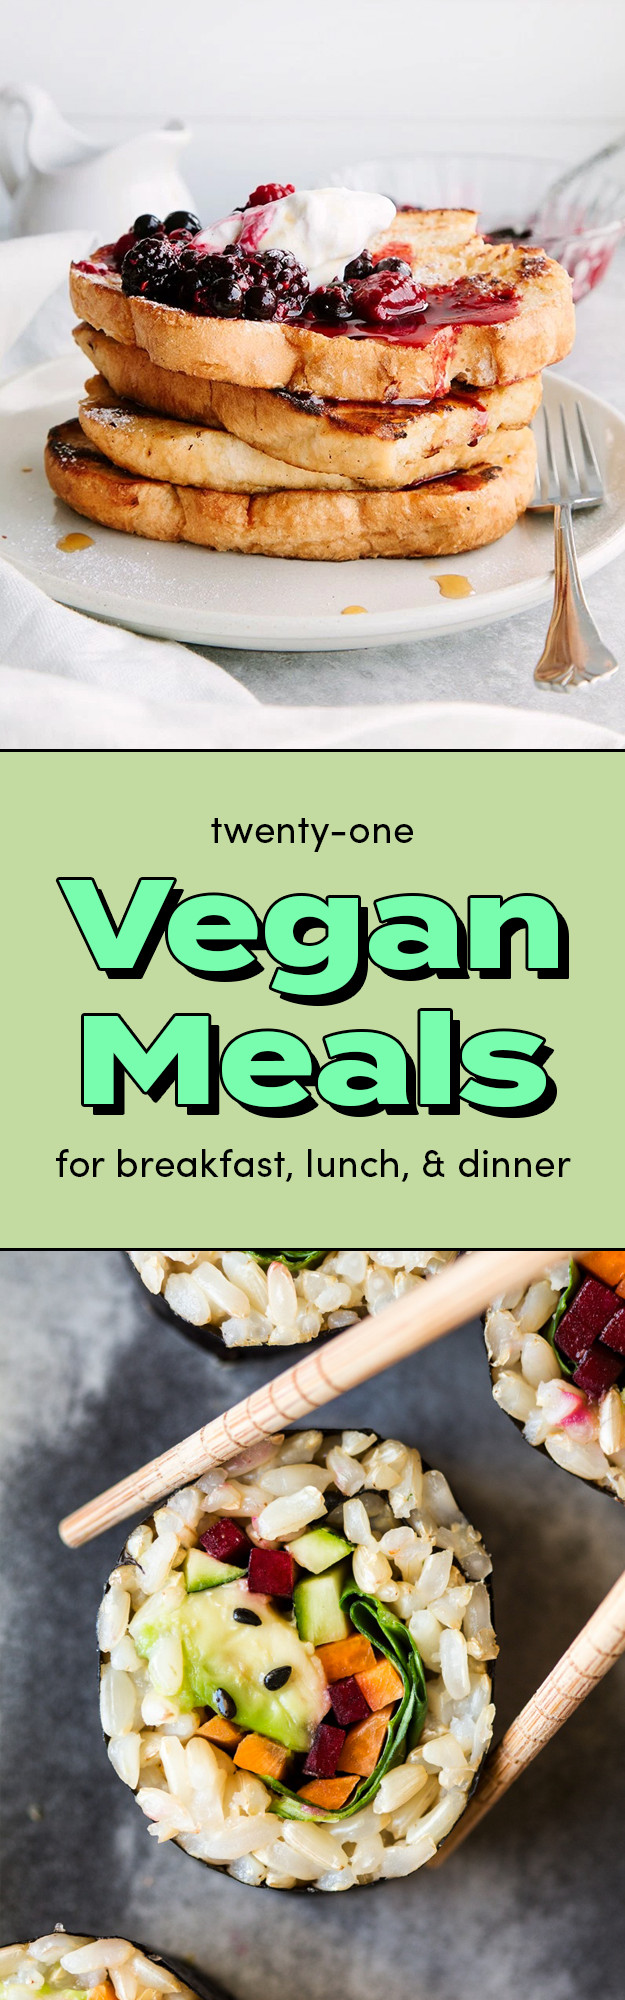 Buzzfeed Vegan Recipes
 Here s 21 Breakfast Lunch And Dinner Recipes With No